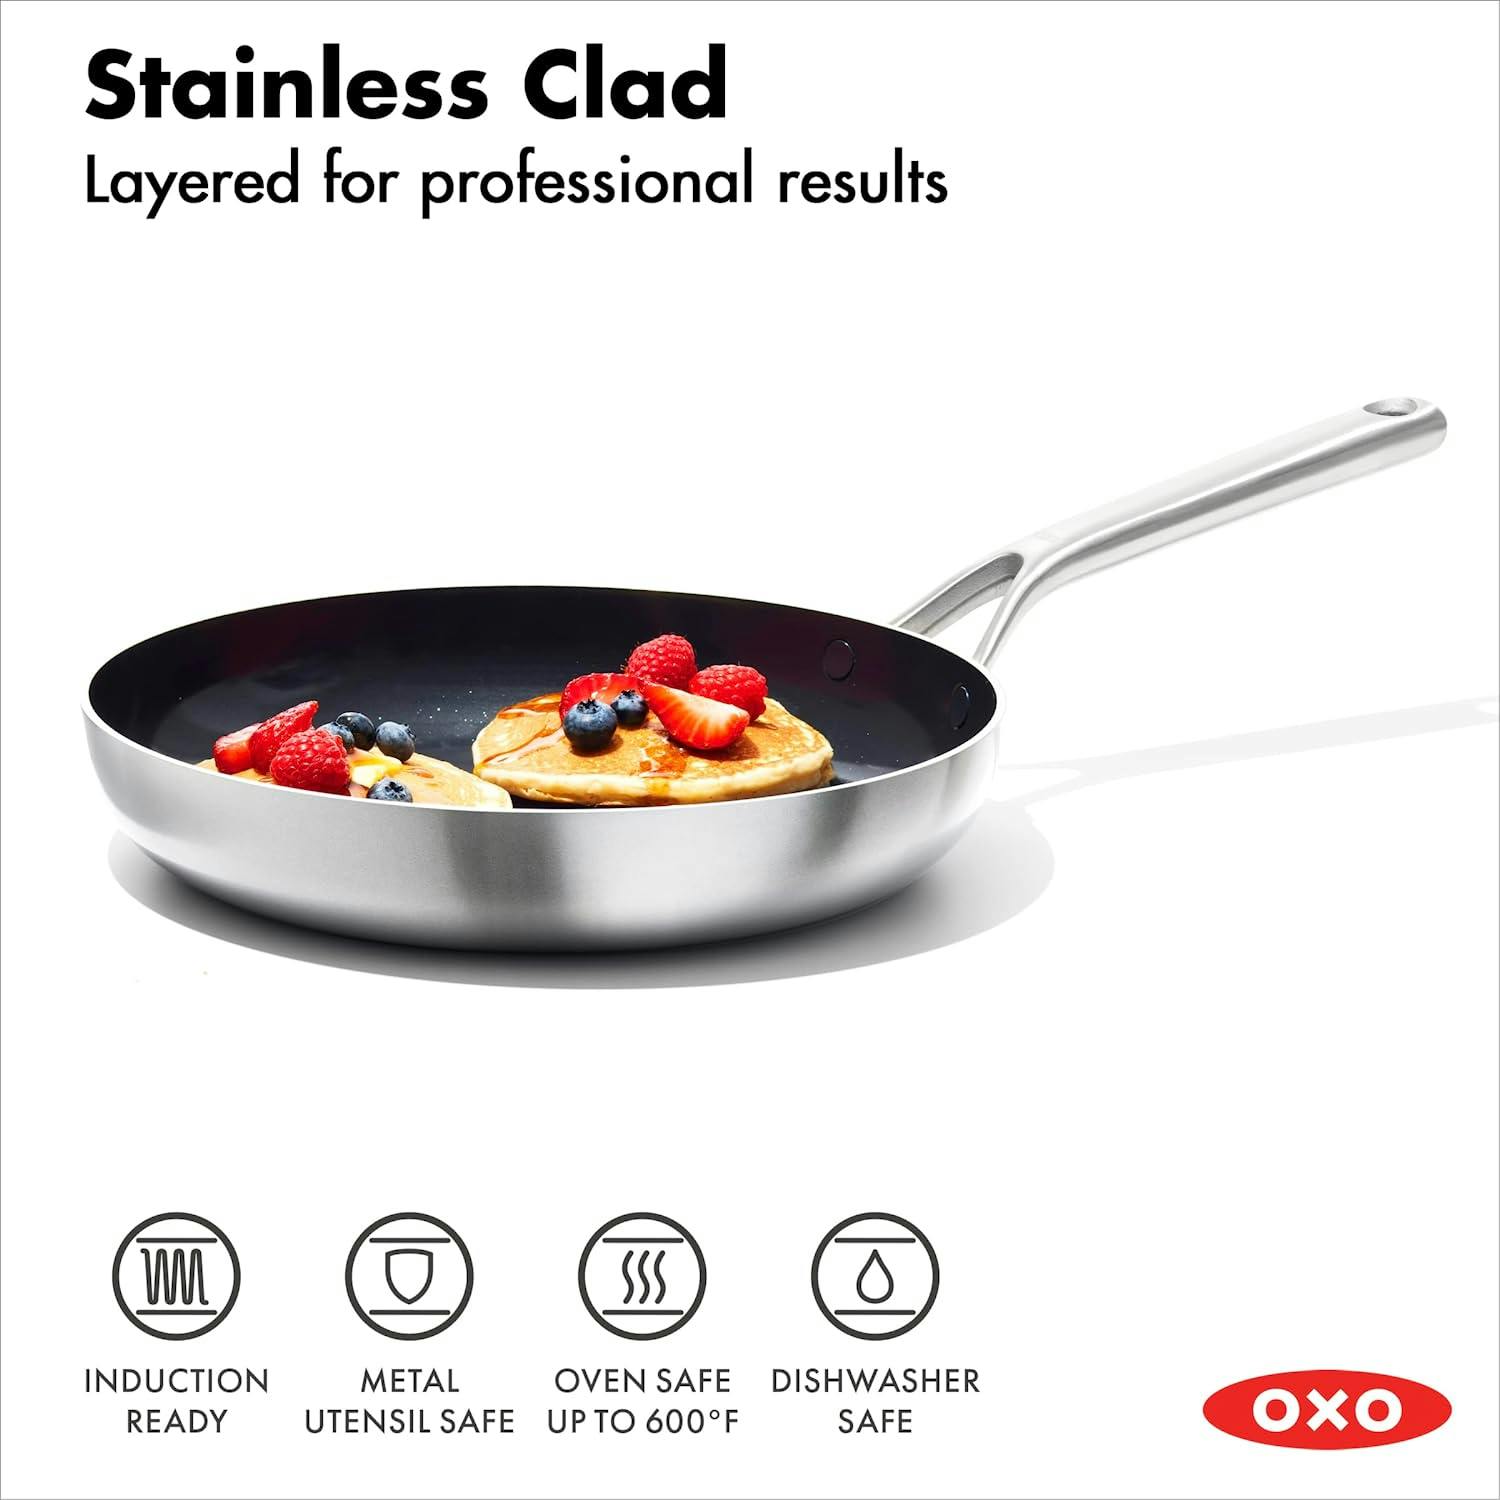 OXO Tri-Ply Stainless Mira Series 2-Piece Fry Pan Set, 8-Inch and 10-Inch